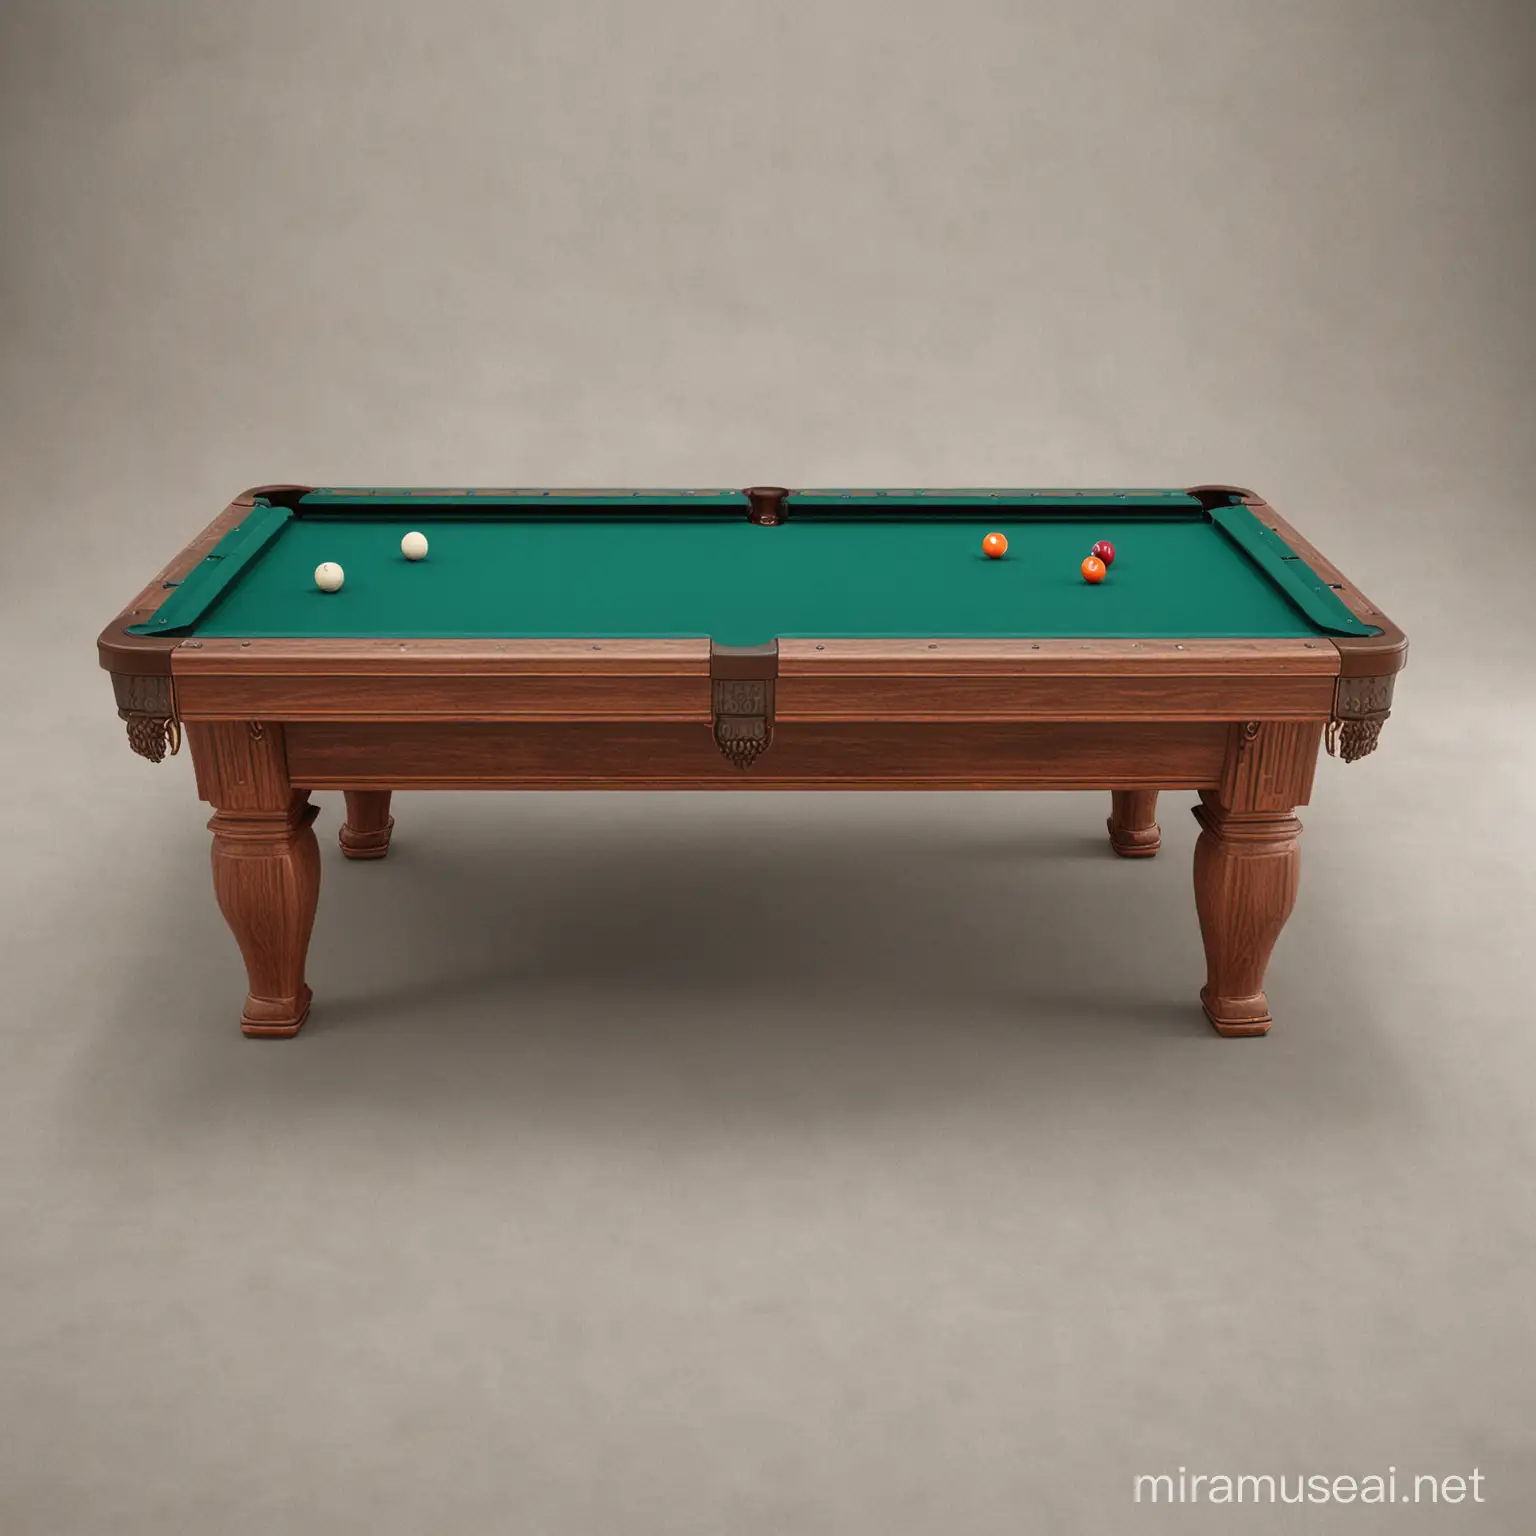 A pool table from the opposite angle